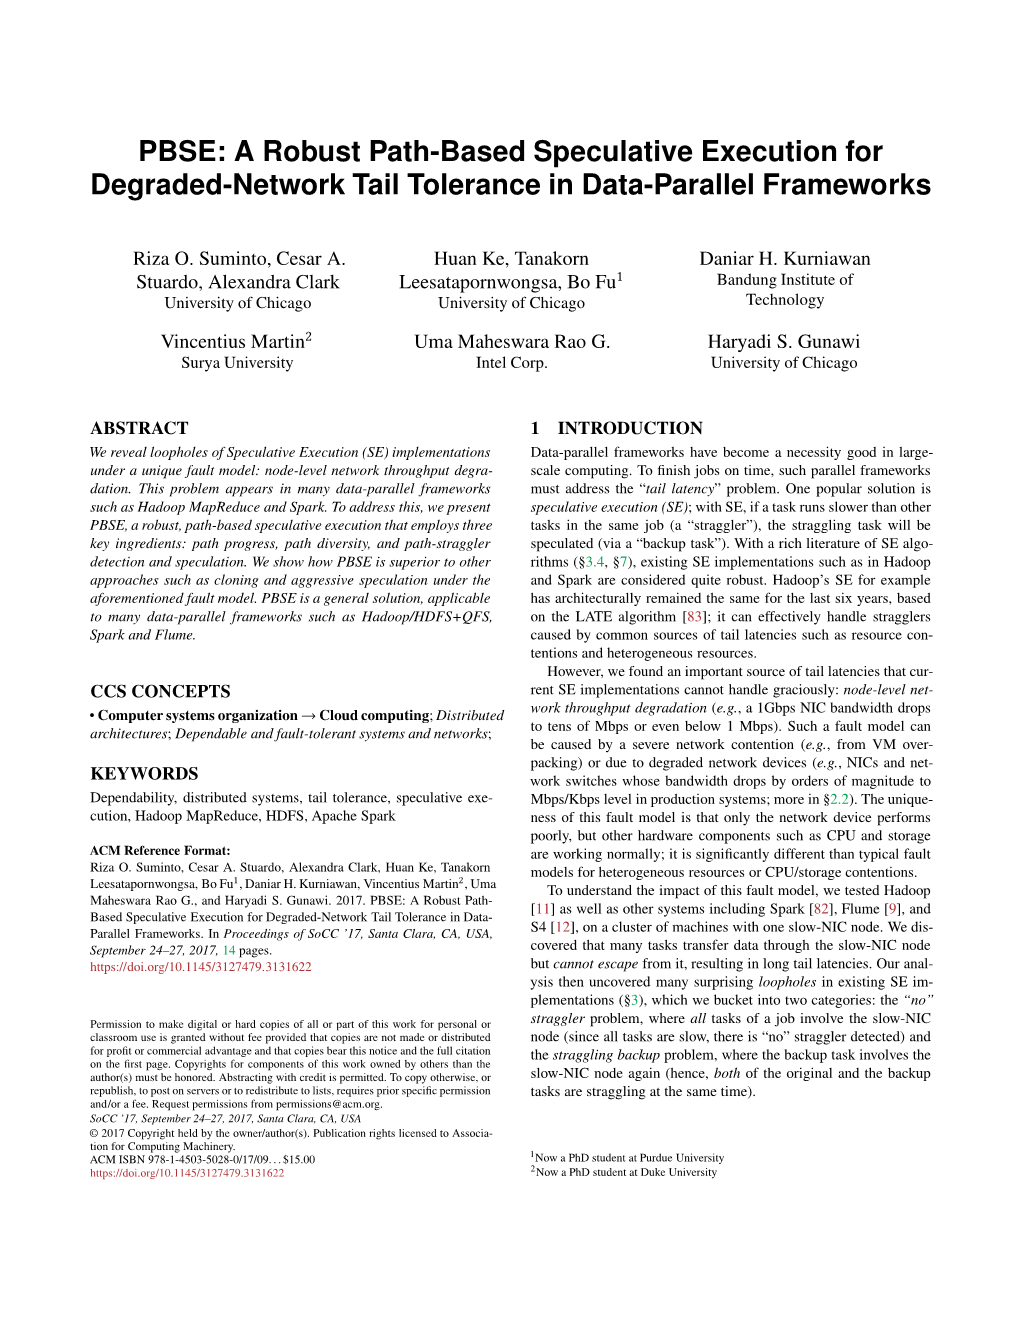 PBSE: a Robust Path-Based Speculative Execution for Degraded-Network Tail Tolerance in Data-Parallel Frameworks